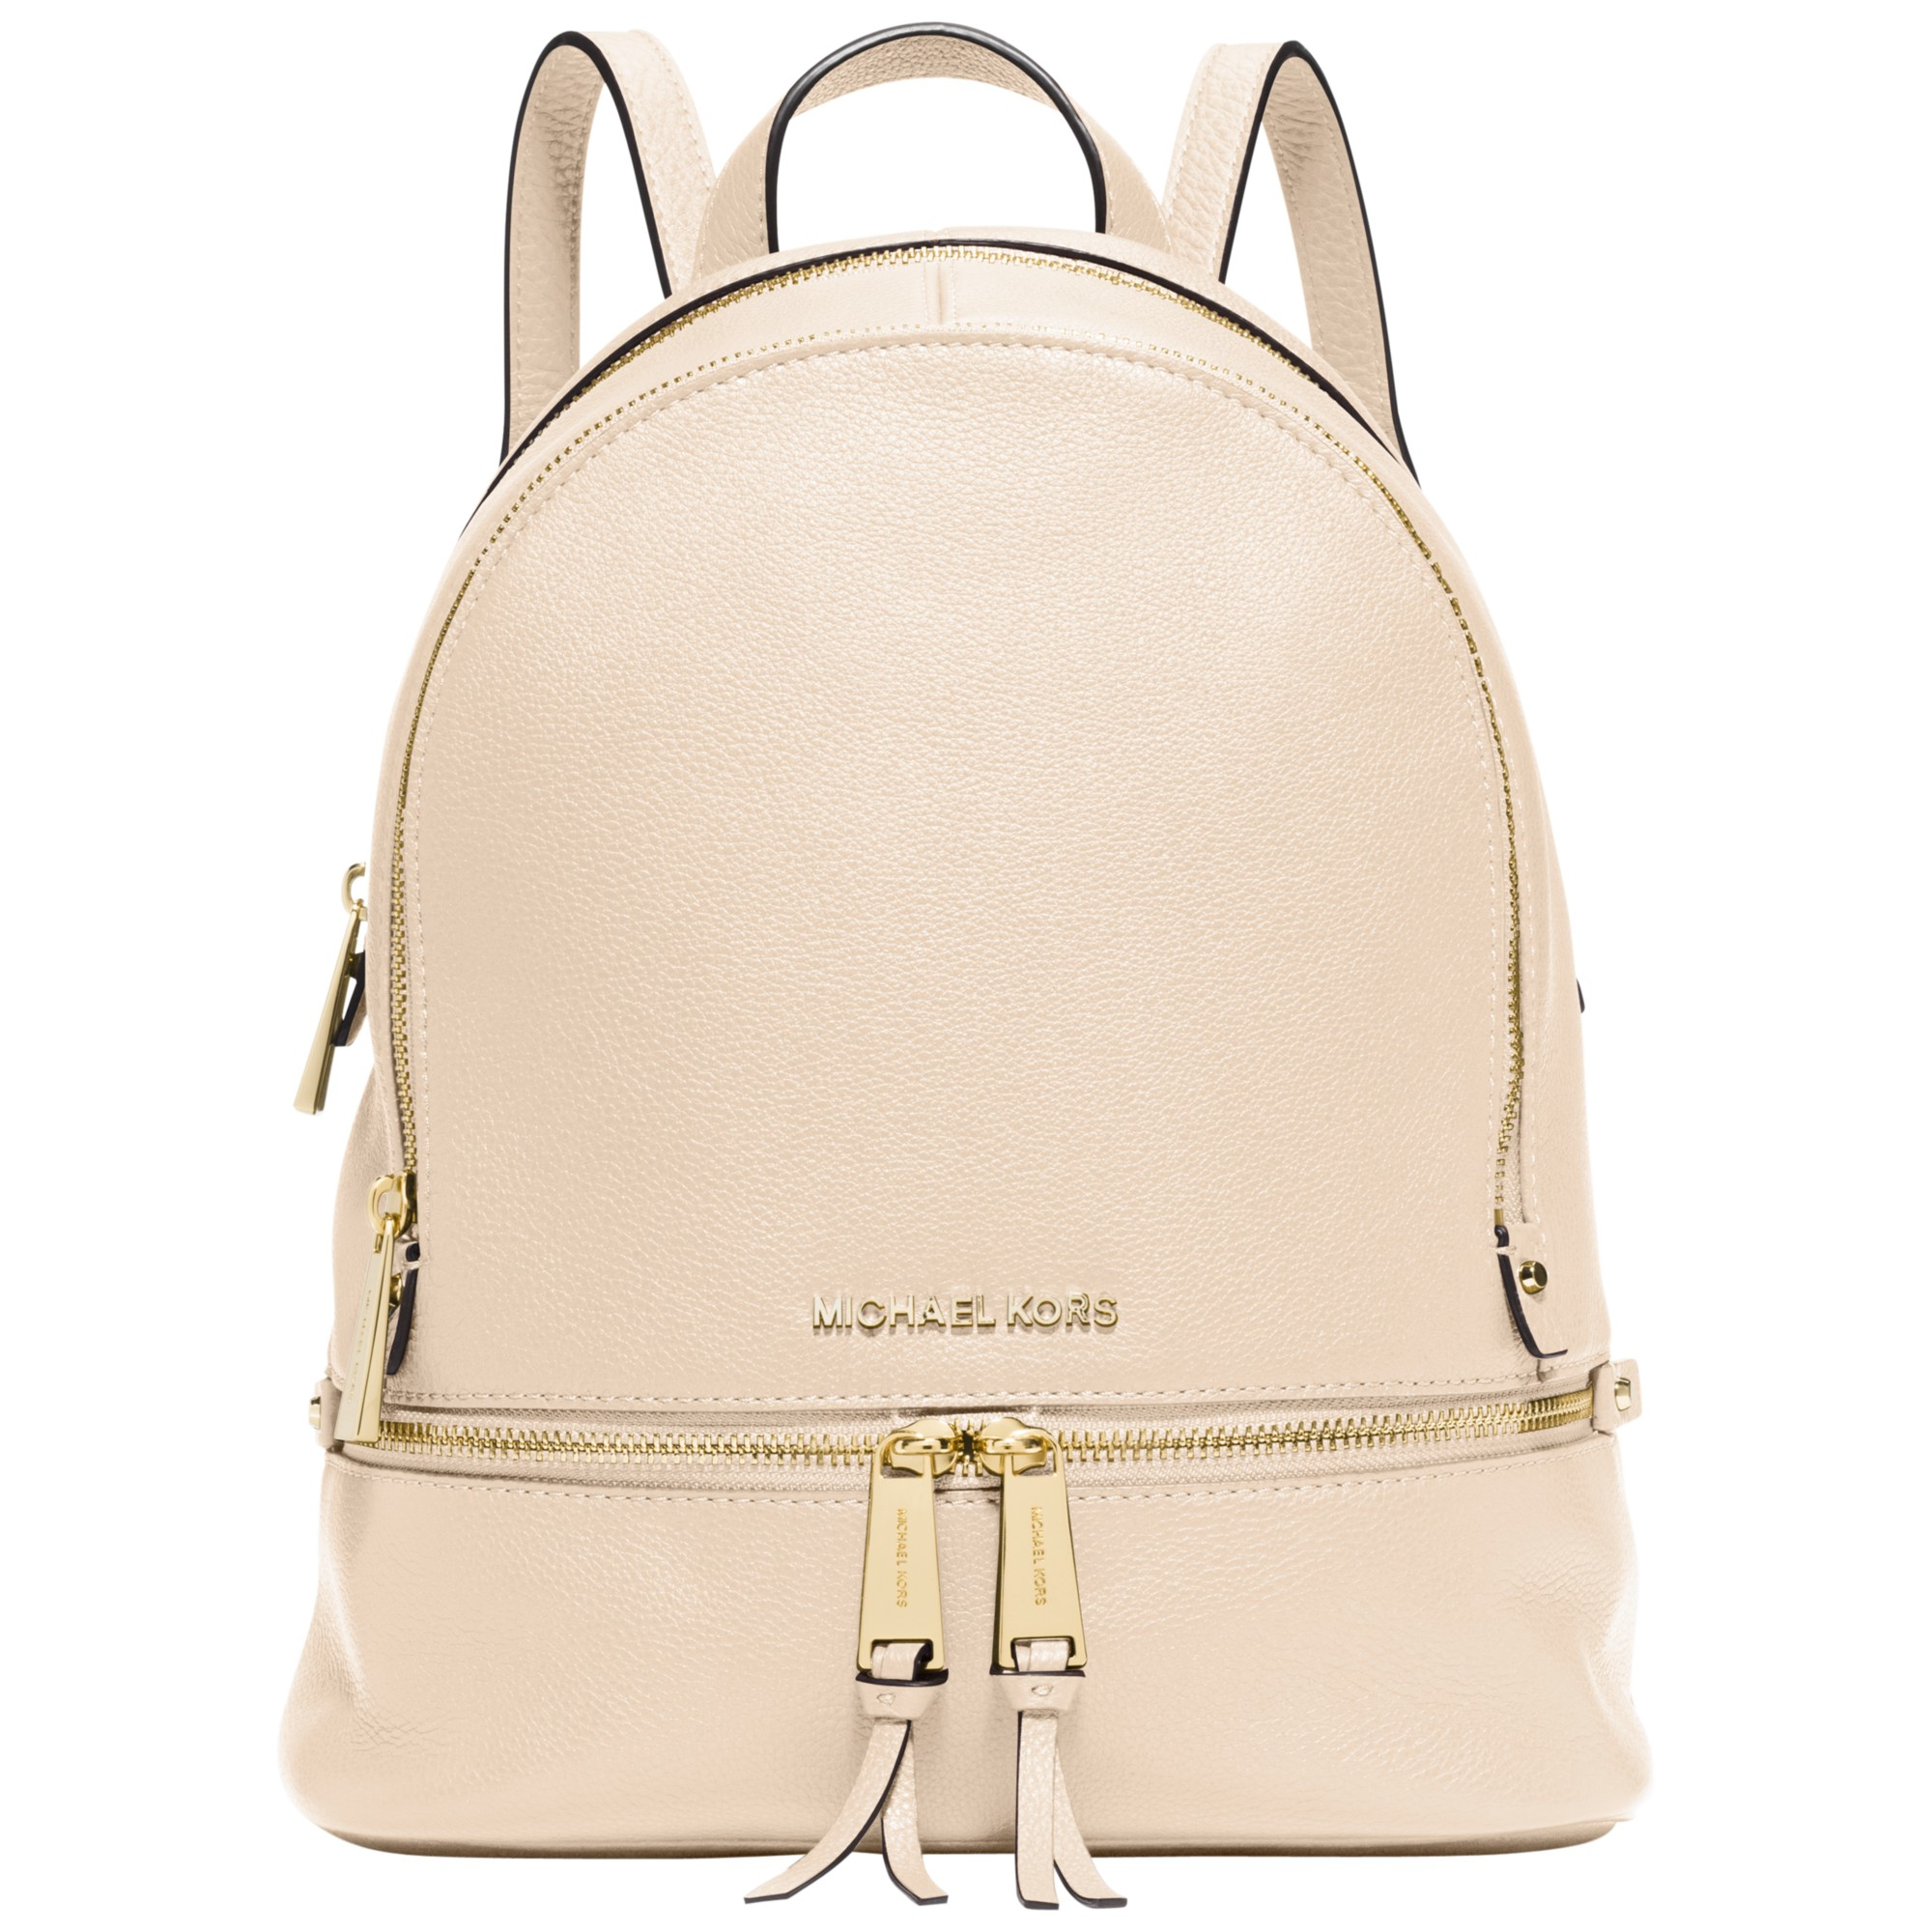 Lyst - Michael Michael Kors Rea Zip Small Leather Backpack in Natural